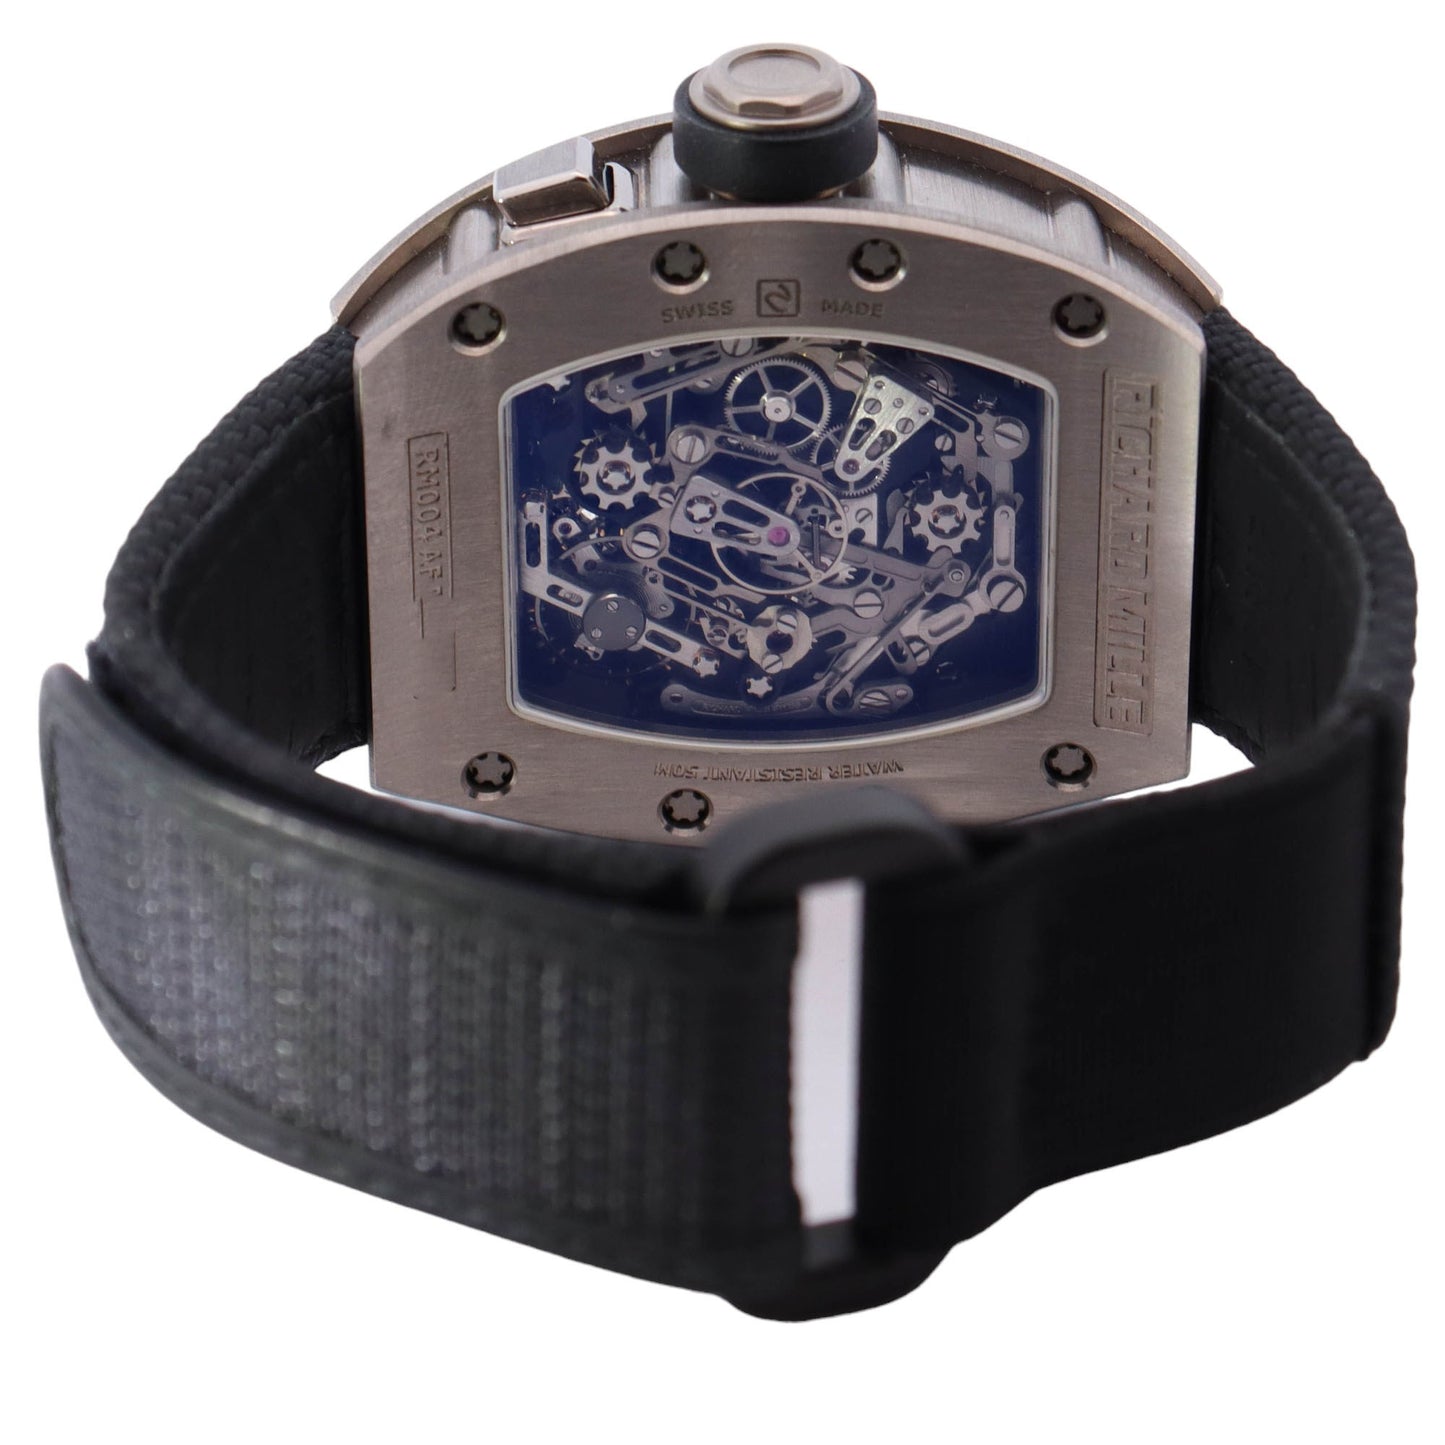 Richard Mille RM004 White Gold 38mm Skeleton Arabic Dial Watch Reference# RM004 - Happy Jewelers Fine Jewelry Lifetime Warranty